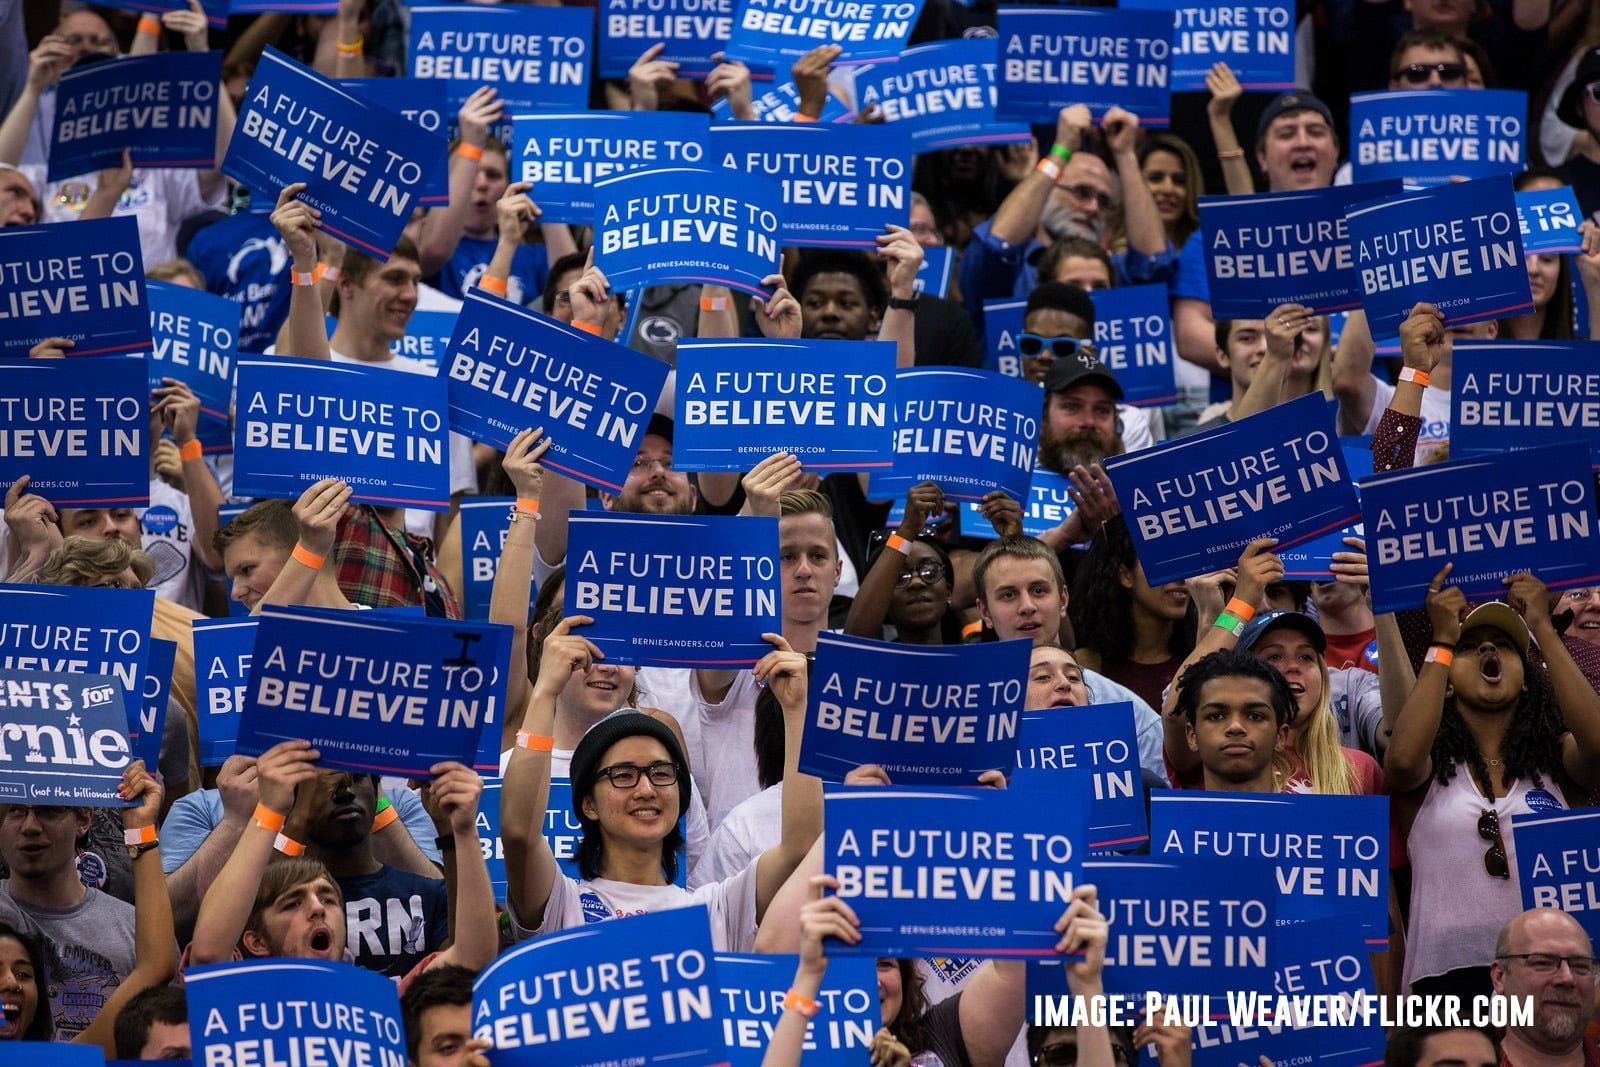 What next for the Sanders campaign? How to defeat the billionaires!